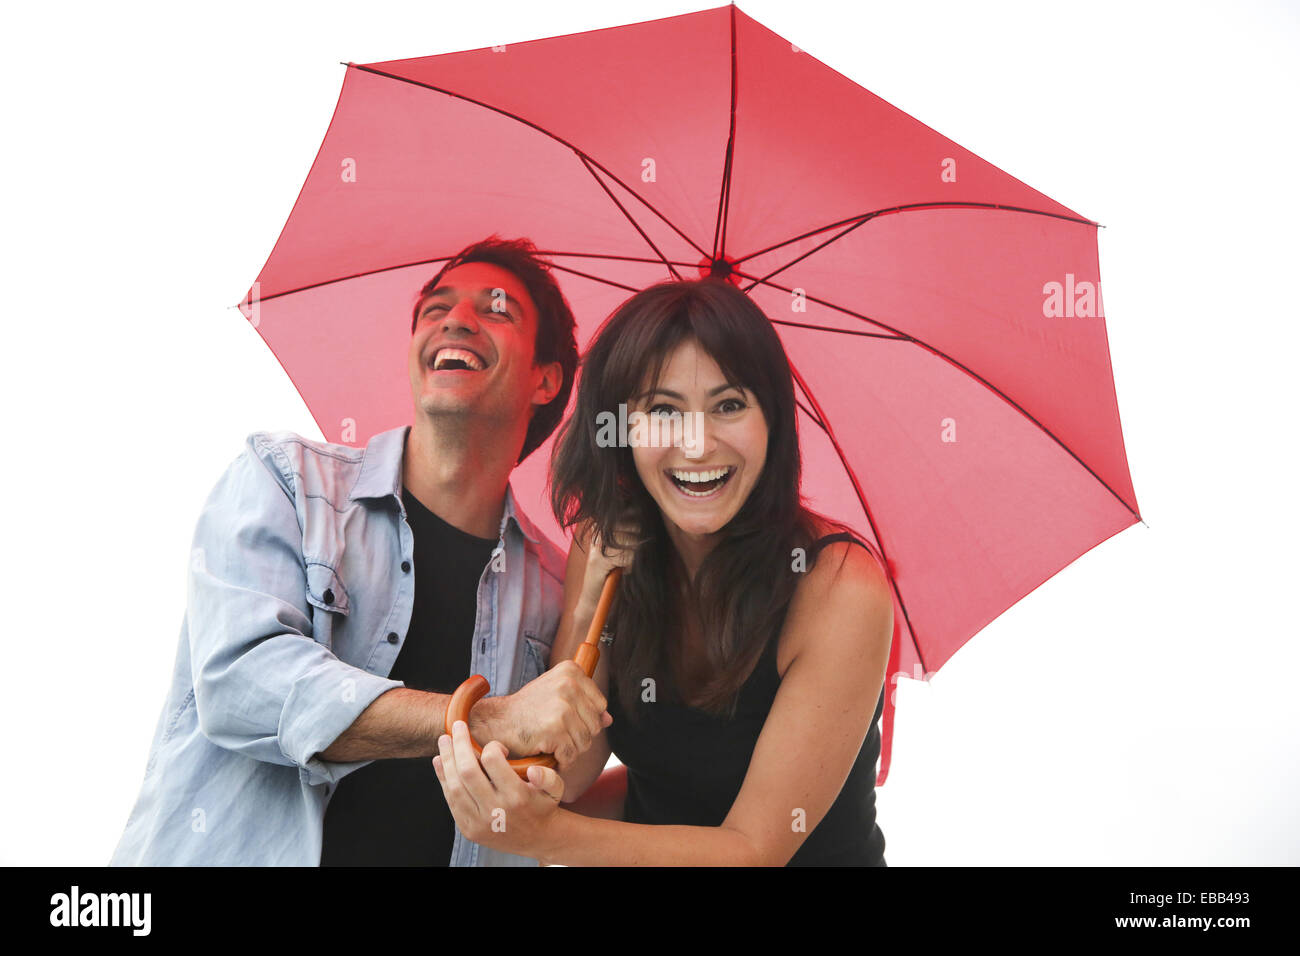 Couple in their 30´s smiling under umbrella. Stock Photo